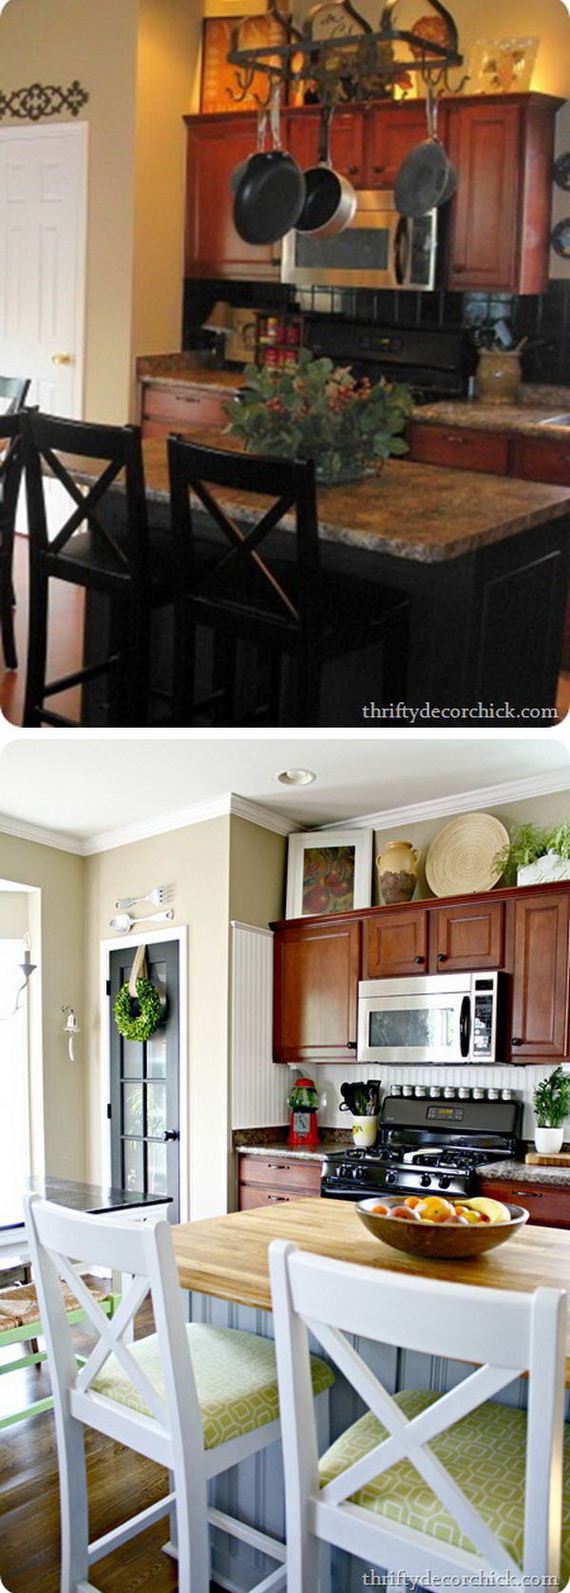 10-before-after-kitchen-makeover